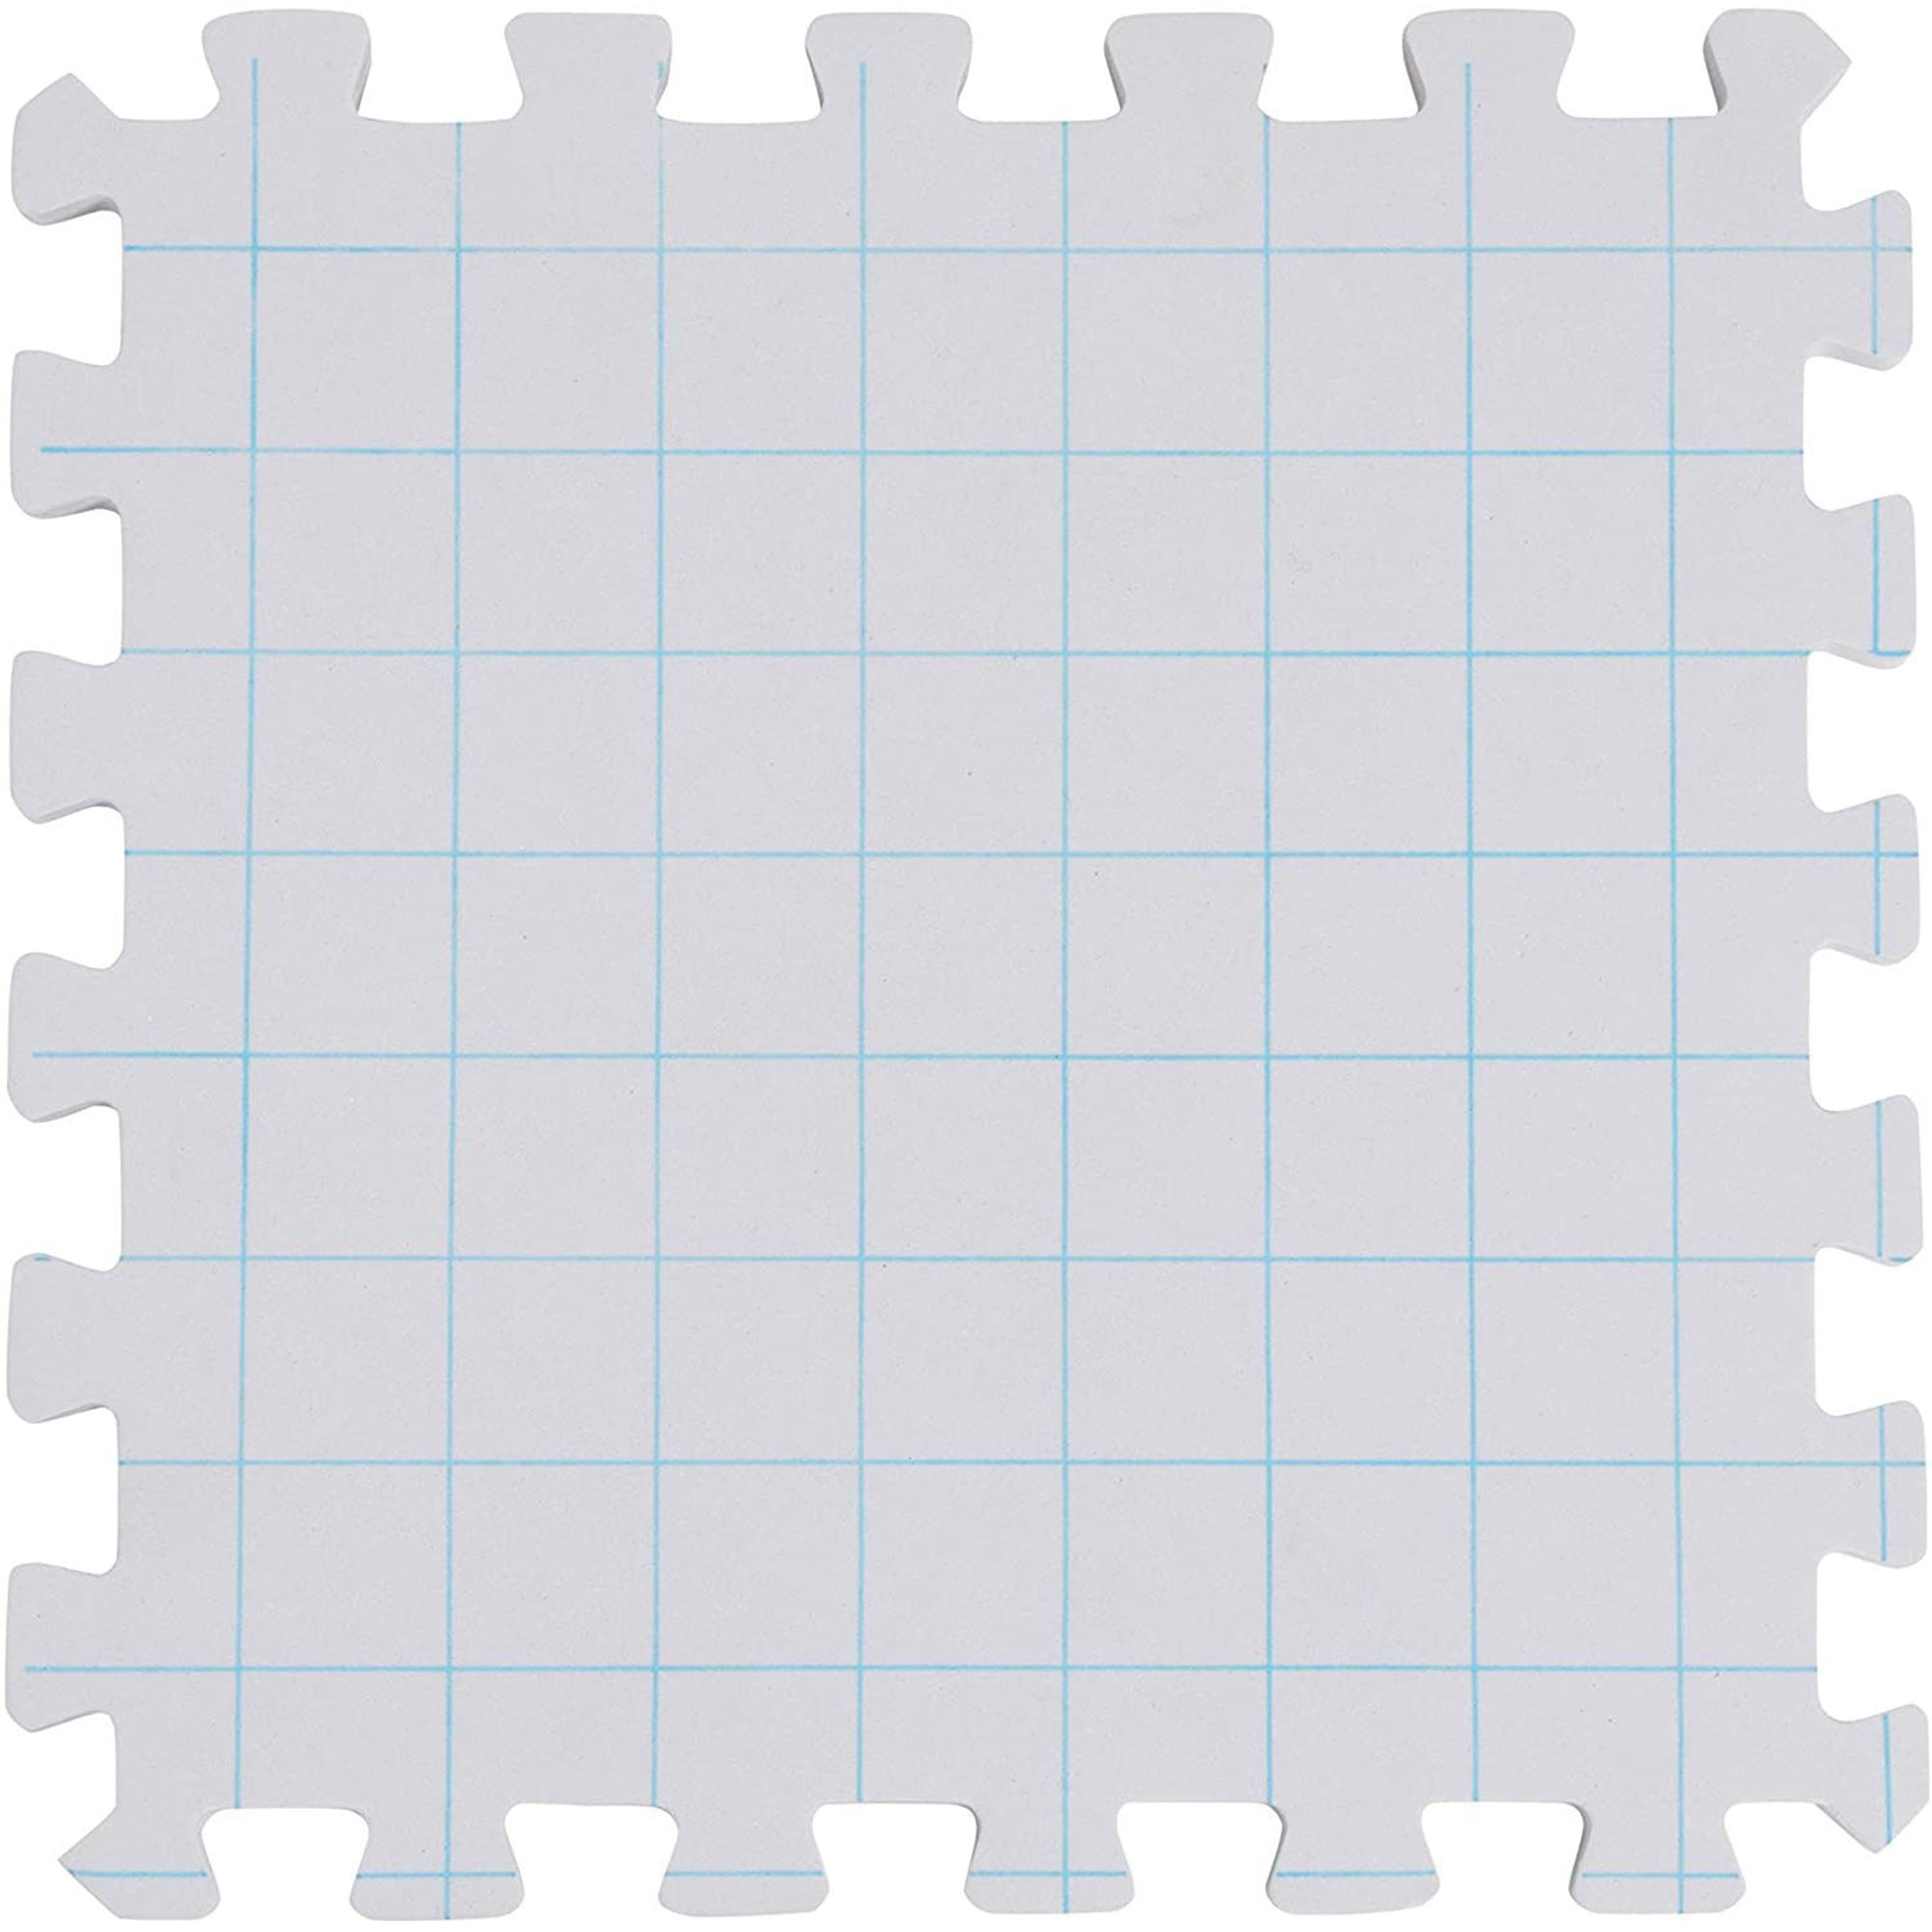 Crutello Extra Thick Blocking Mats for Knitting - Pack of 9 White